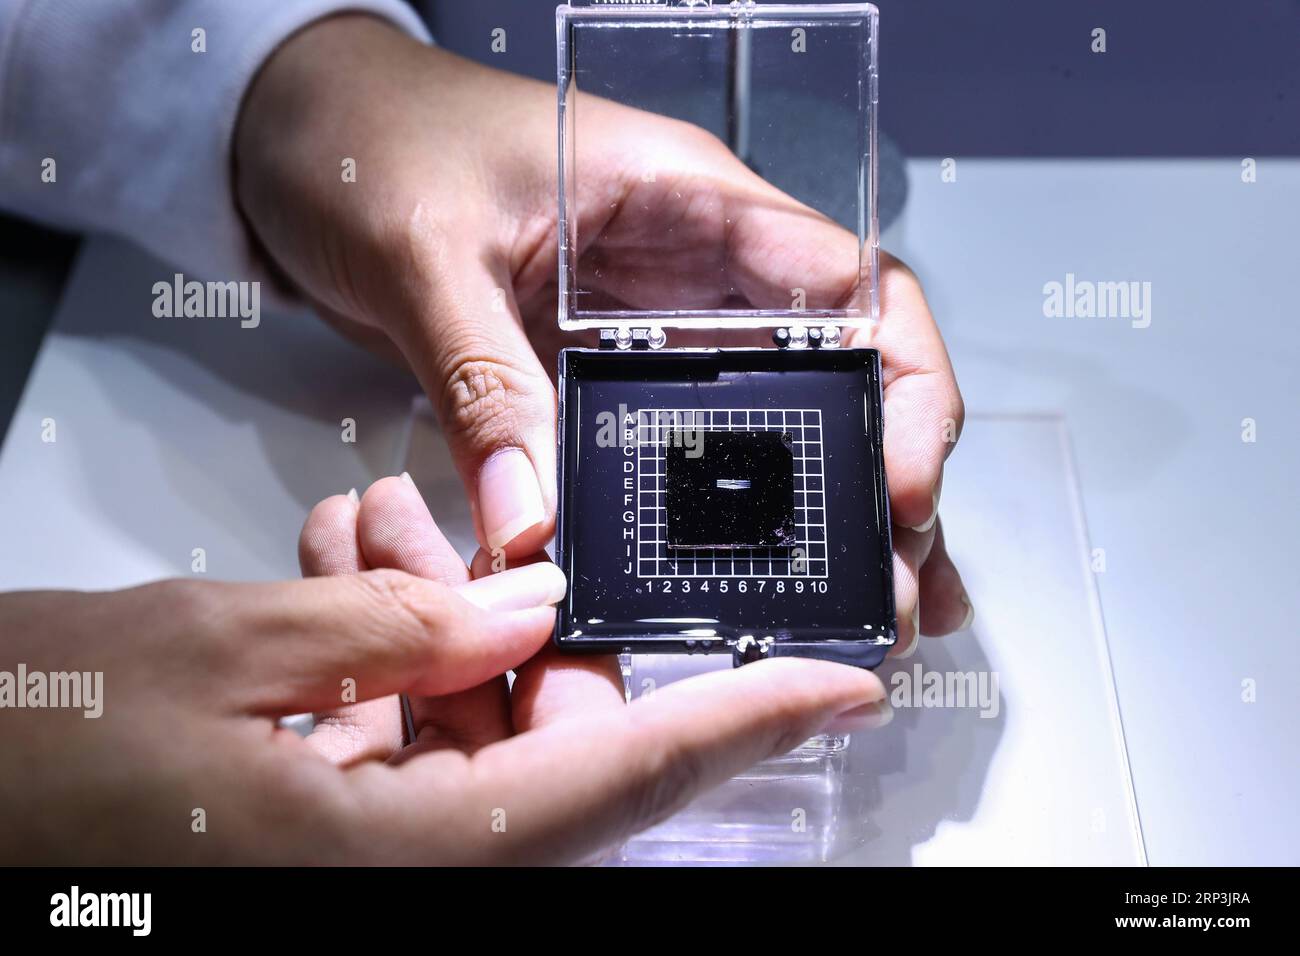 (181008) -- BEIJING, Oct. 8, 2018 -- A staff member shows a photonic AI chip during a press preview of the 2018 National Mass Innovation and Entrepreneurship Week in Beijing, capital of China, Oct. 8, 2018. The weekly event will run from October 9 to 15. ) (lmm) CHINA-BEIJING-TECHNOLOGY-INNOVATION-ENTREPRENEURSHIP (CN) ZhangxYuwei PUBLICATIONxNOTxINxCHN Stock Photo